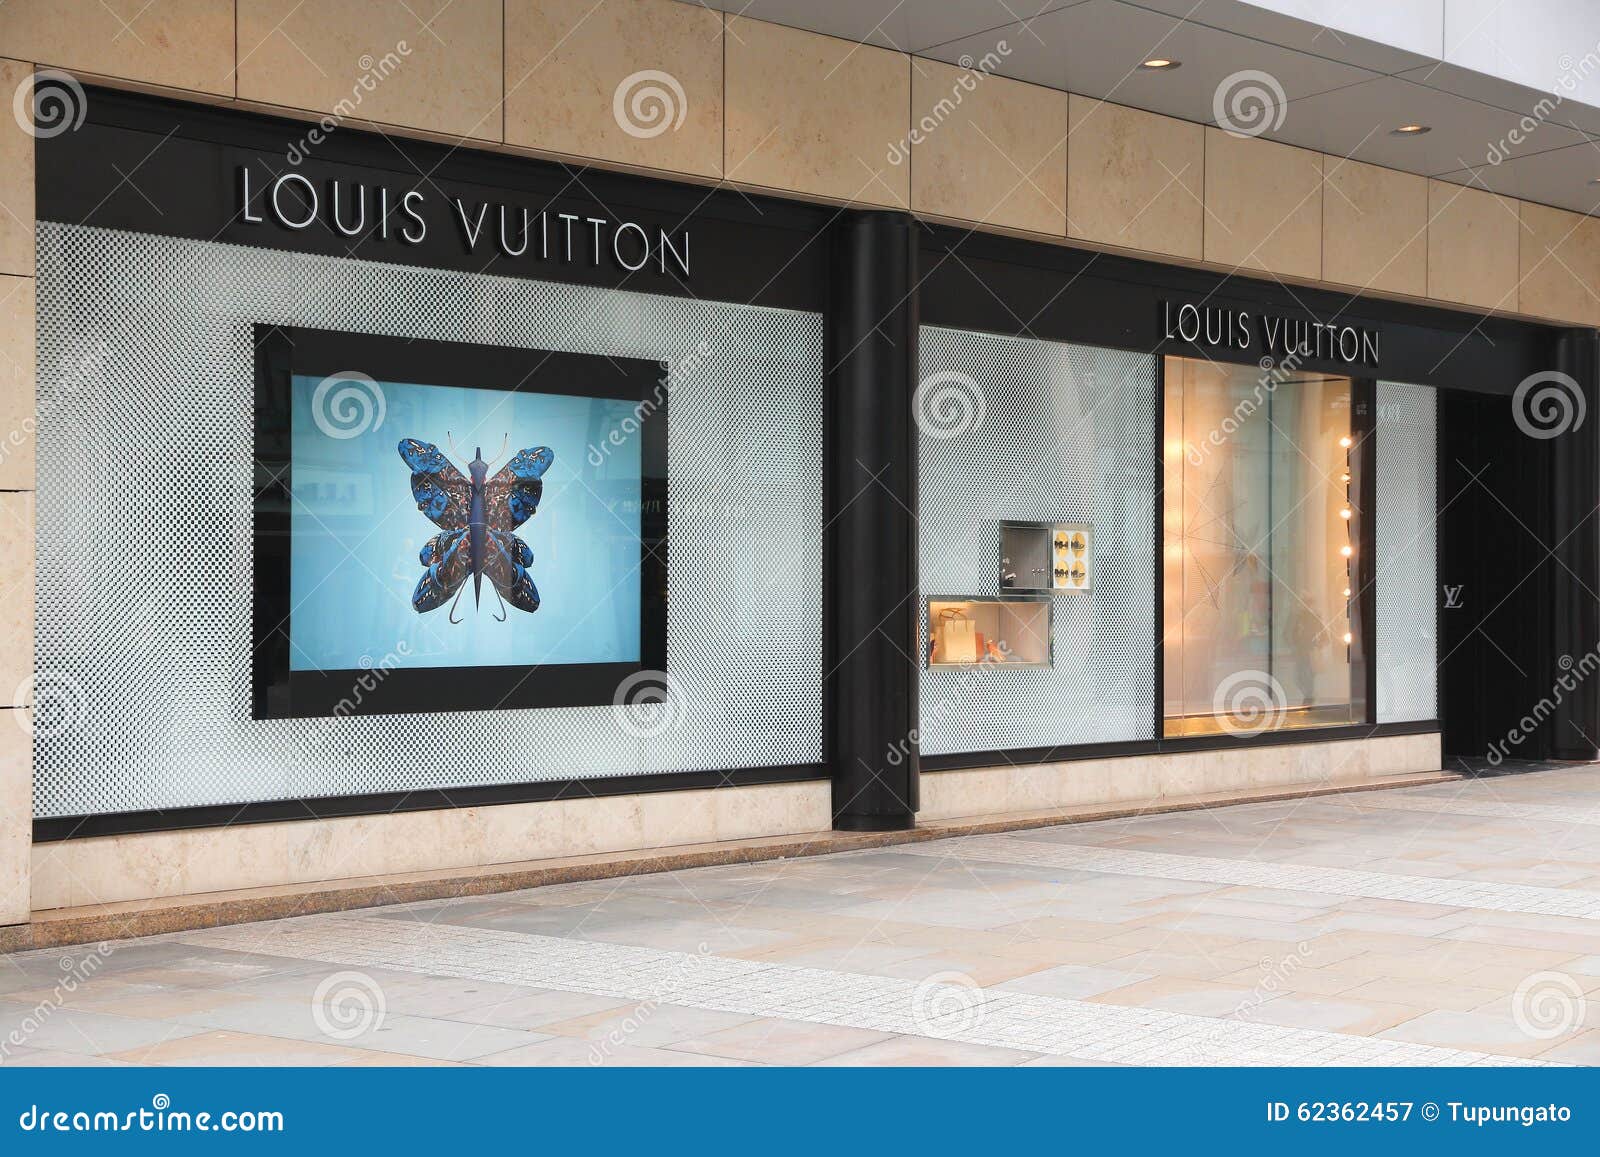 Louis Vuitton luxury store photography. of - 62362457